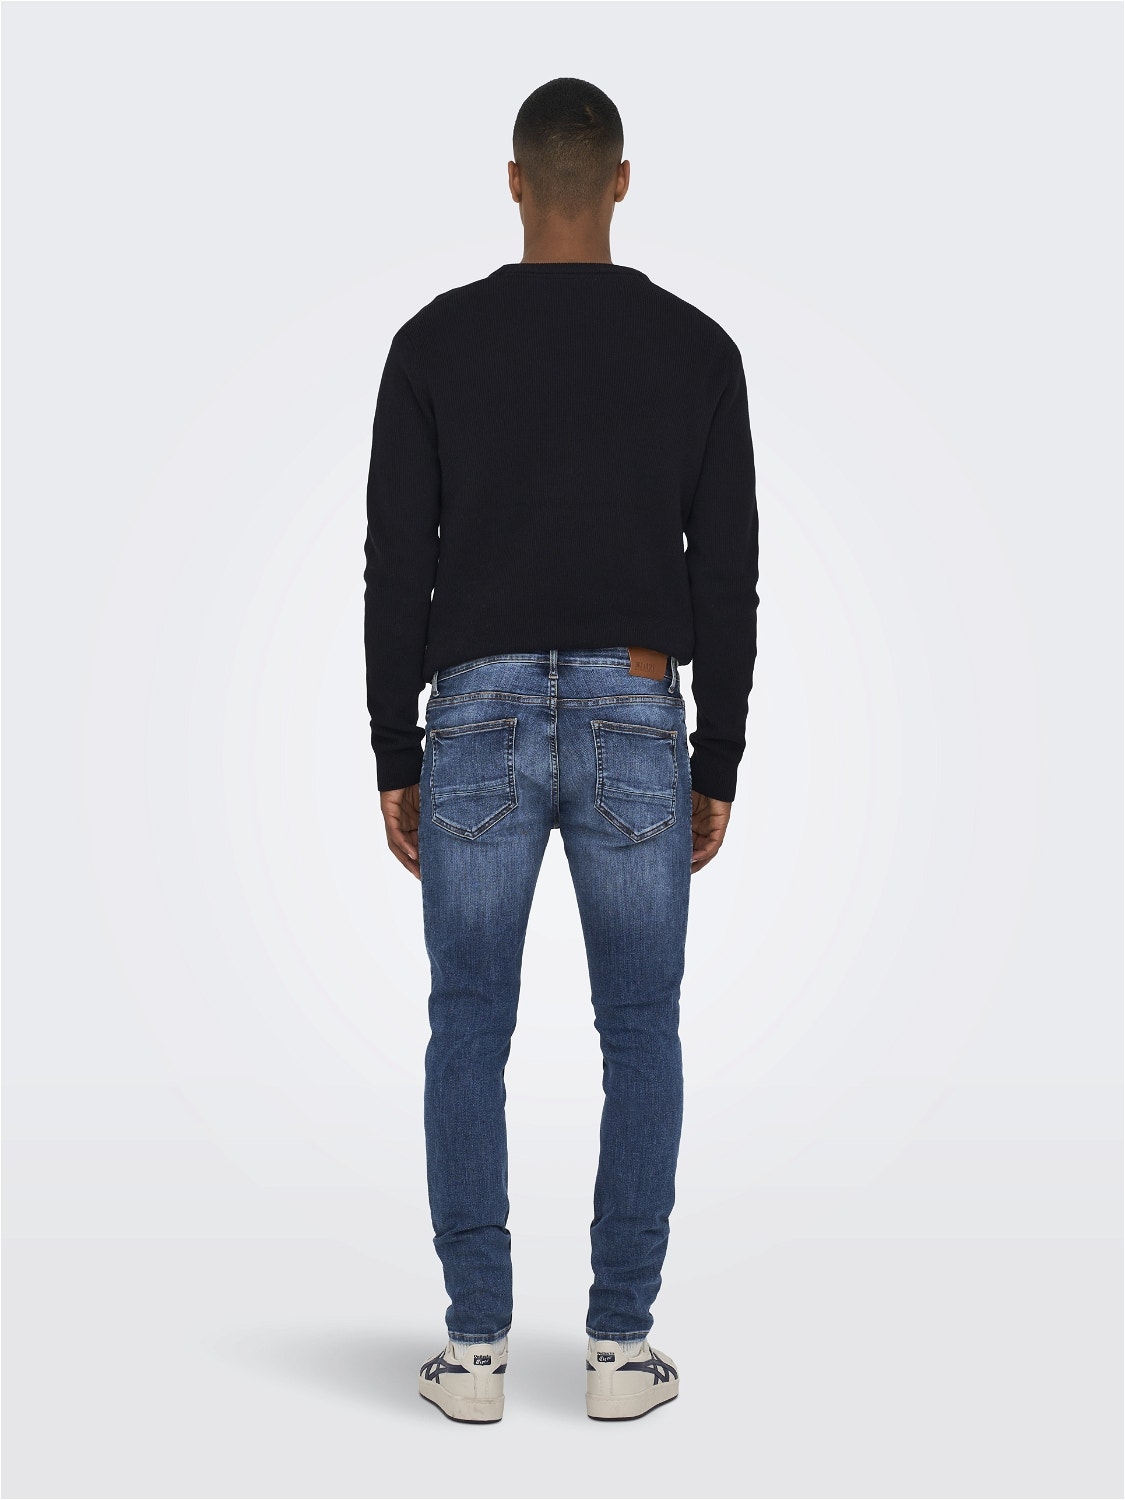 ONLY & SONS Skinny Fit Niedrige Taille Jeans -Blue Denim - 22023229